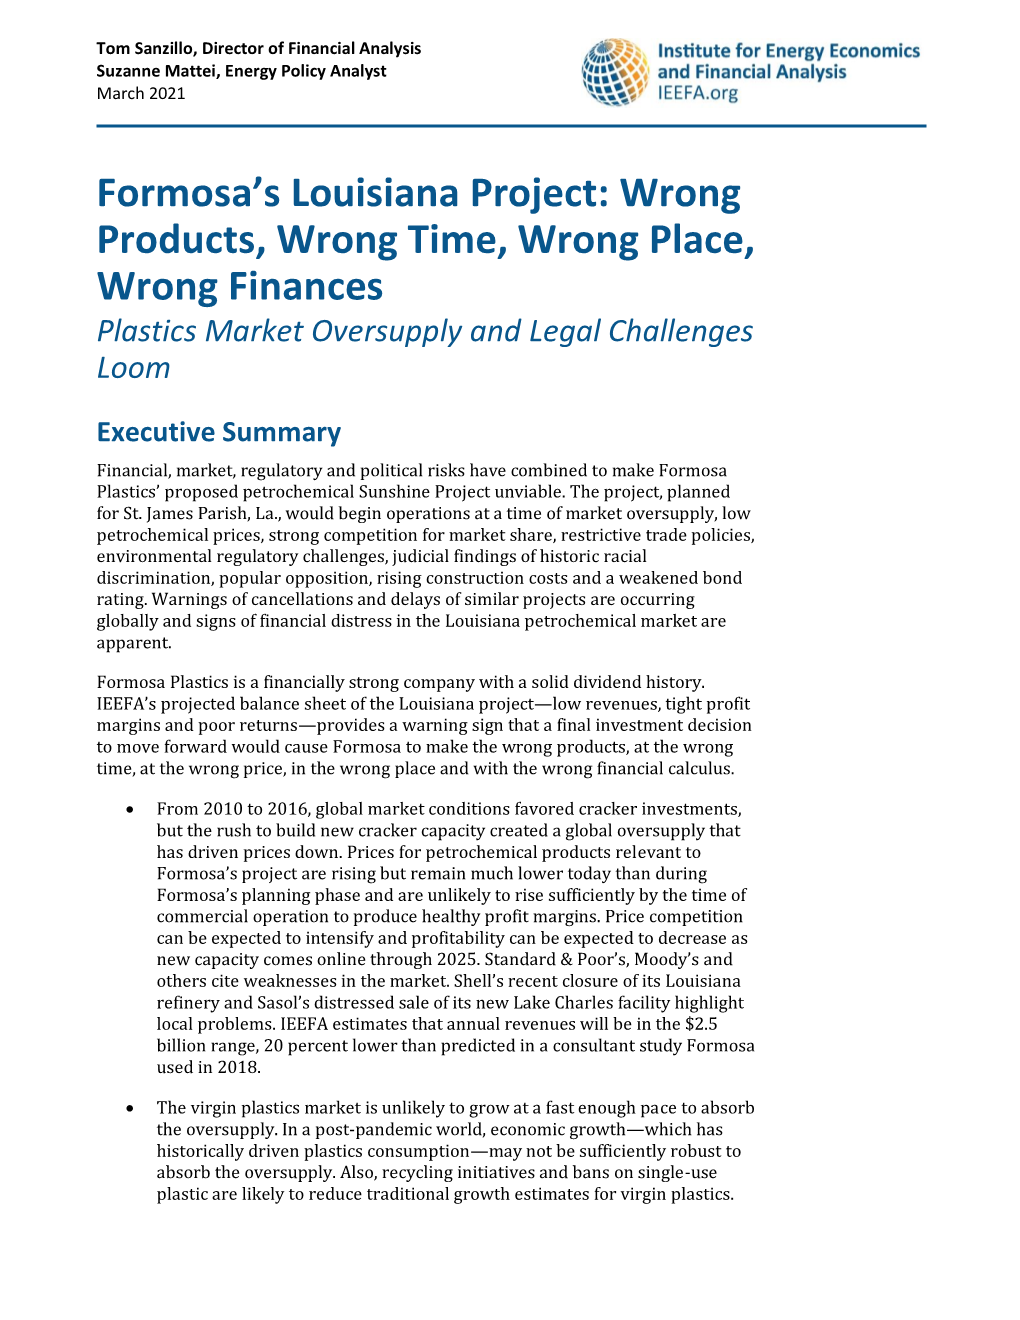 Formosa's Louisiana Project: Wrong Products, Wrong Time, Wrong